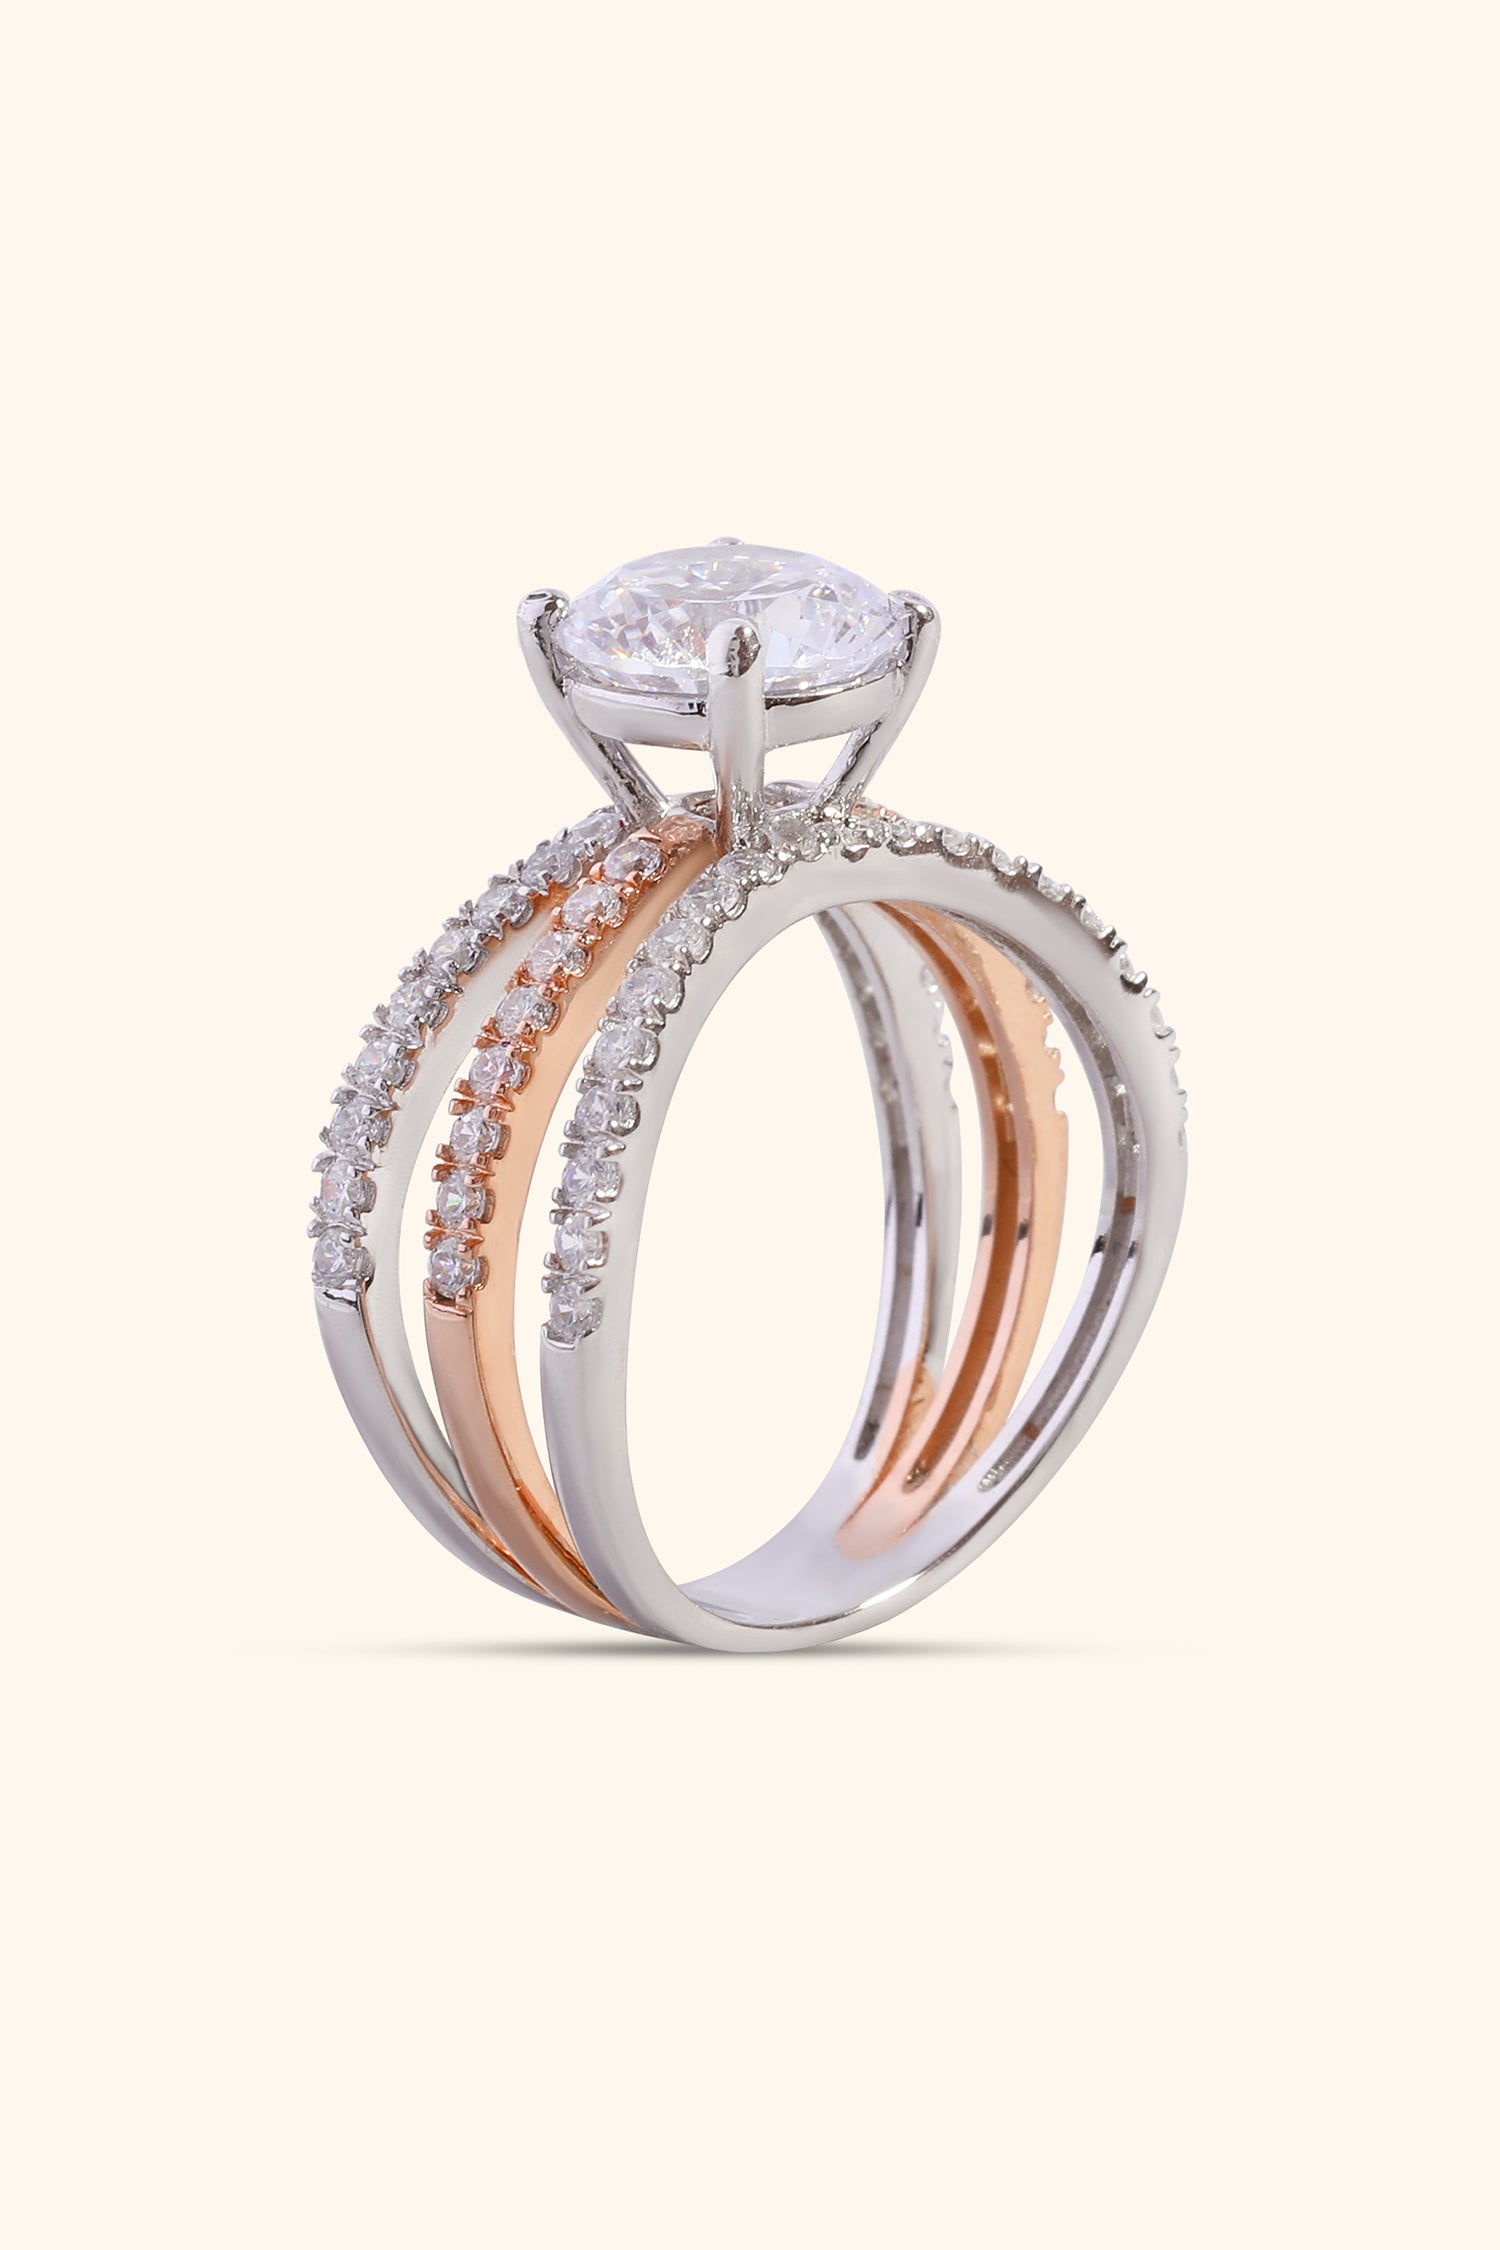 ESTRELLA TRIPLE PAVE RING WITH A ROUND SOLITAIRE